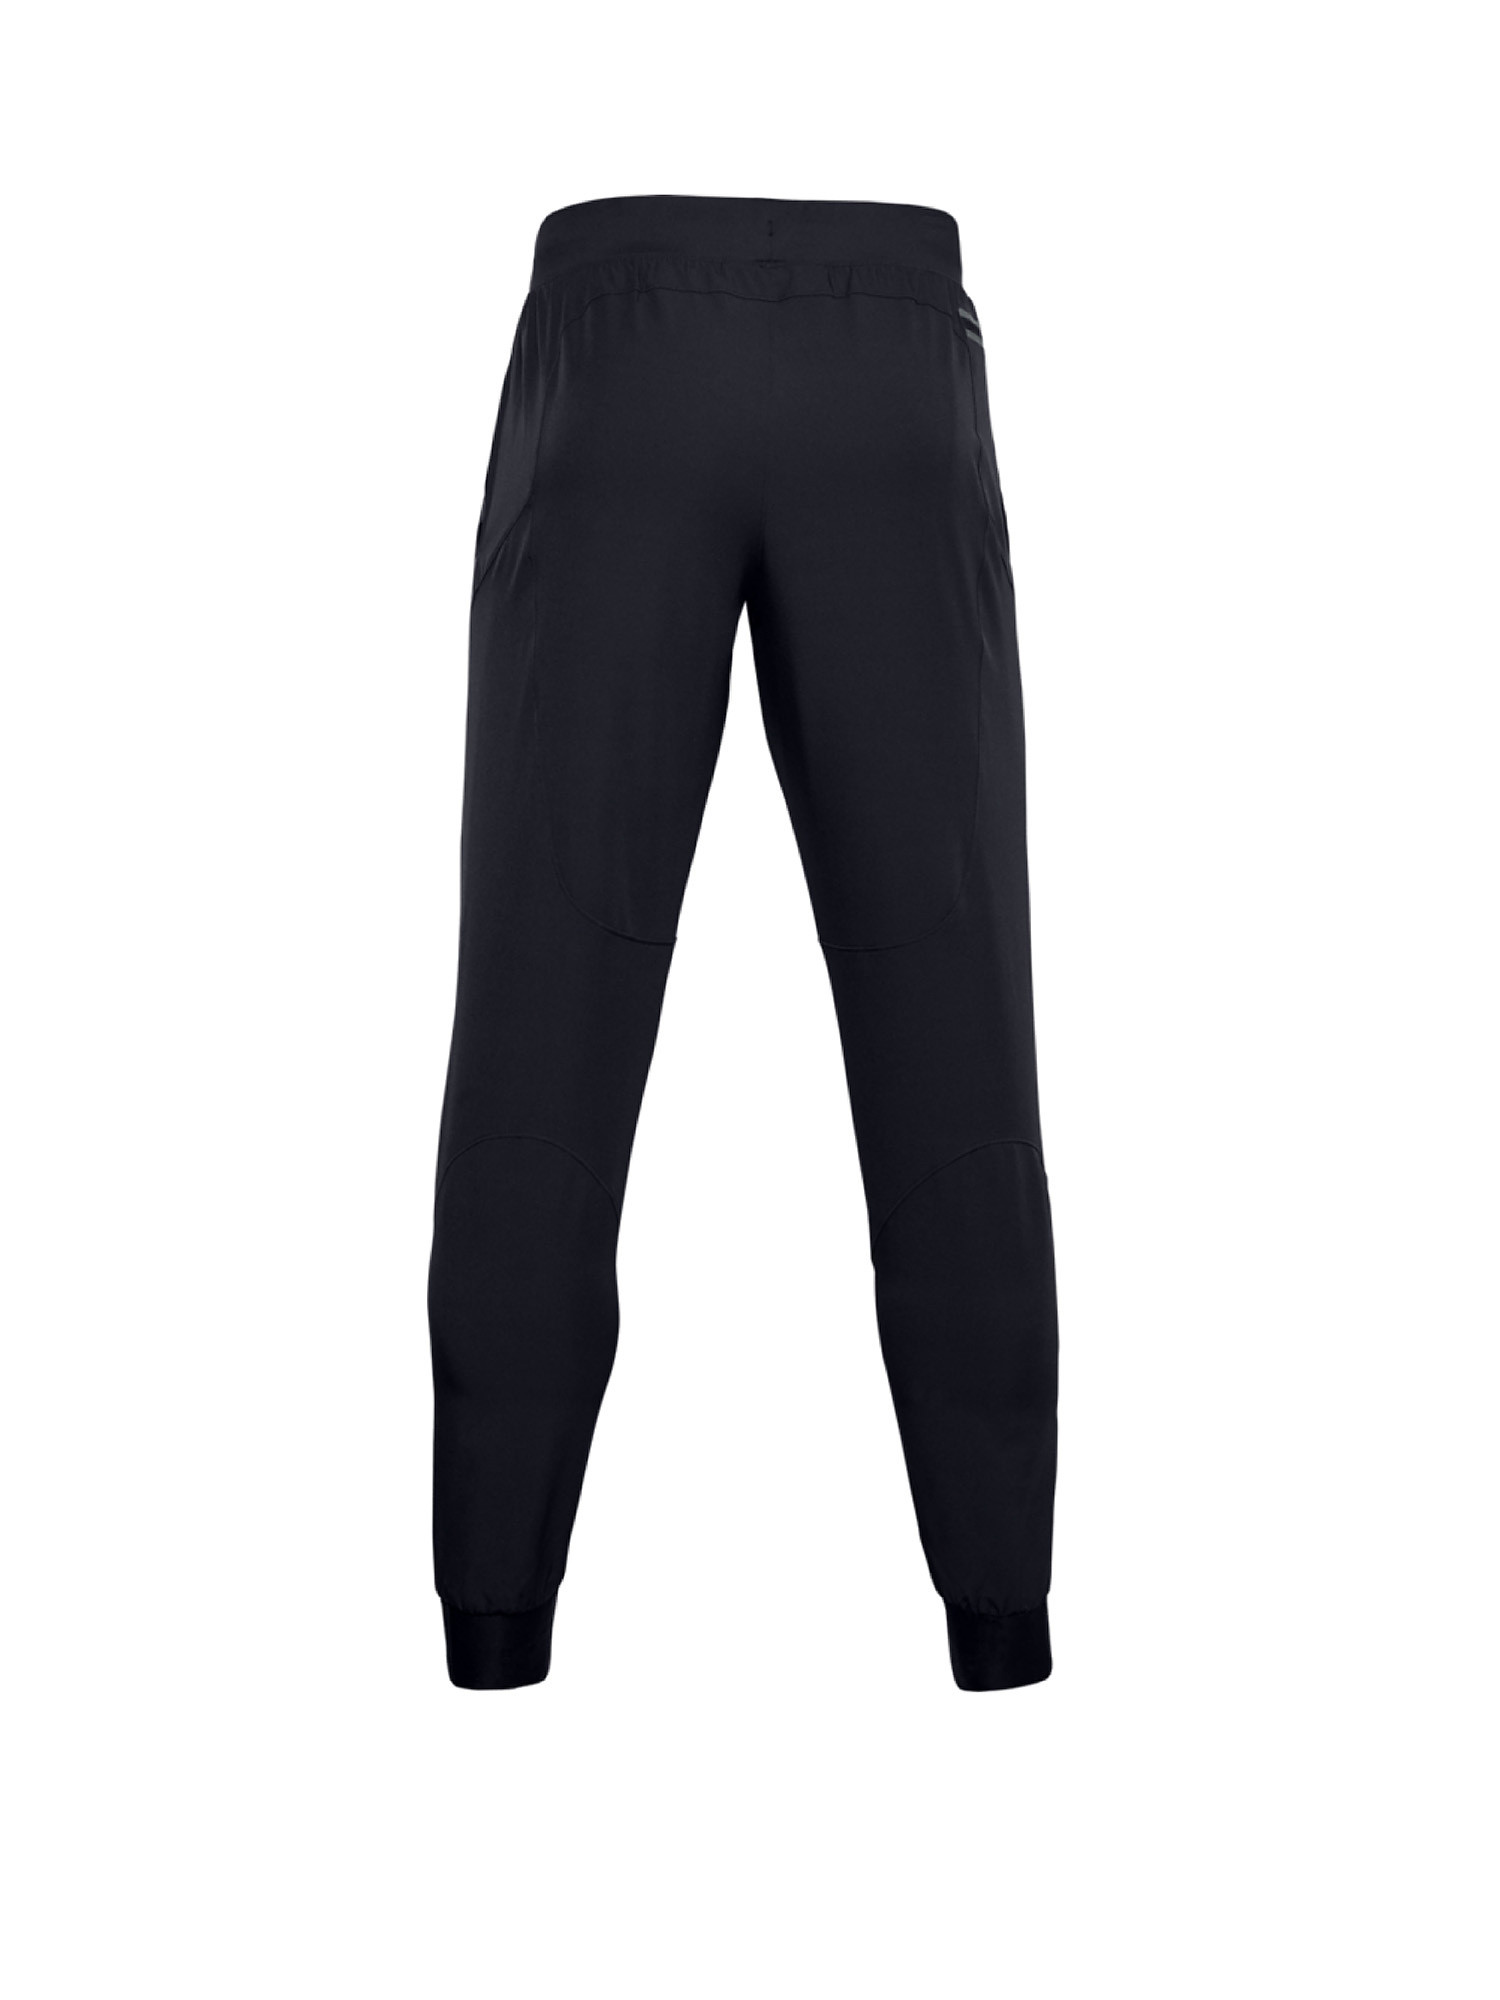 Under Armour - Joggers UA Unstoppable, Black, large image number 3